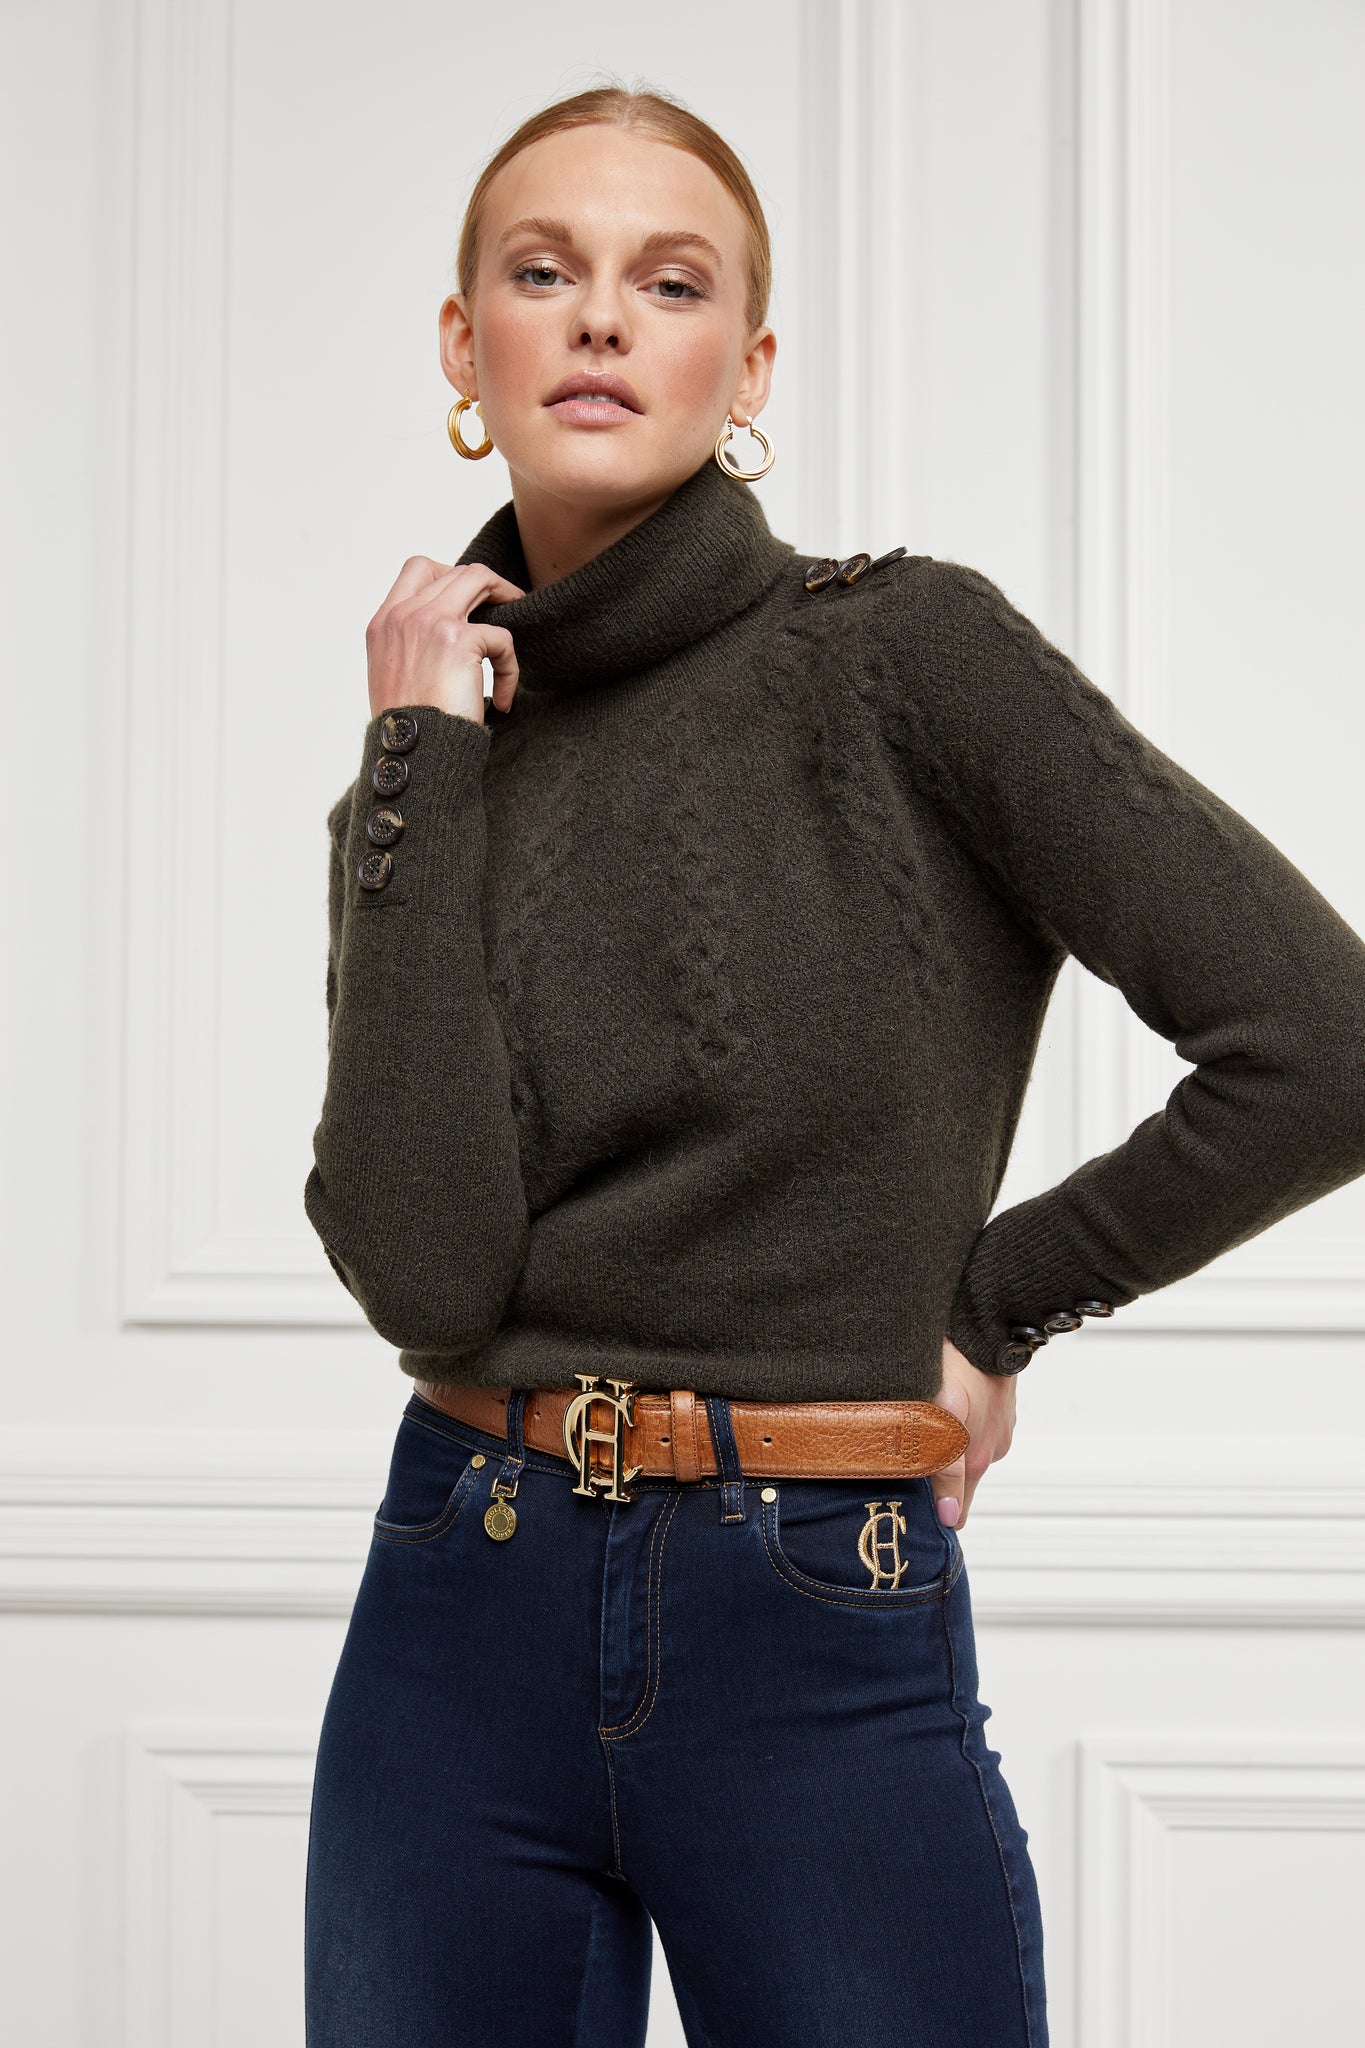 Chunky knit roll neck jumper in fern green with textured knit detailing and horn buttons across both shoulders